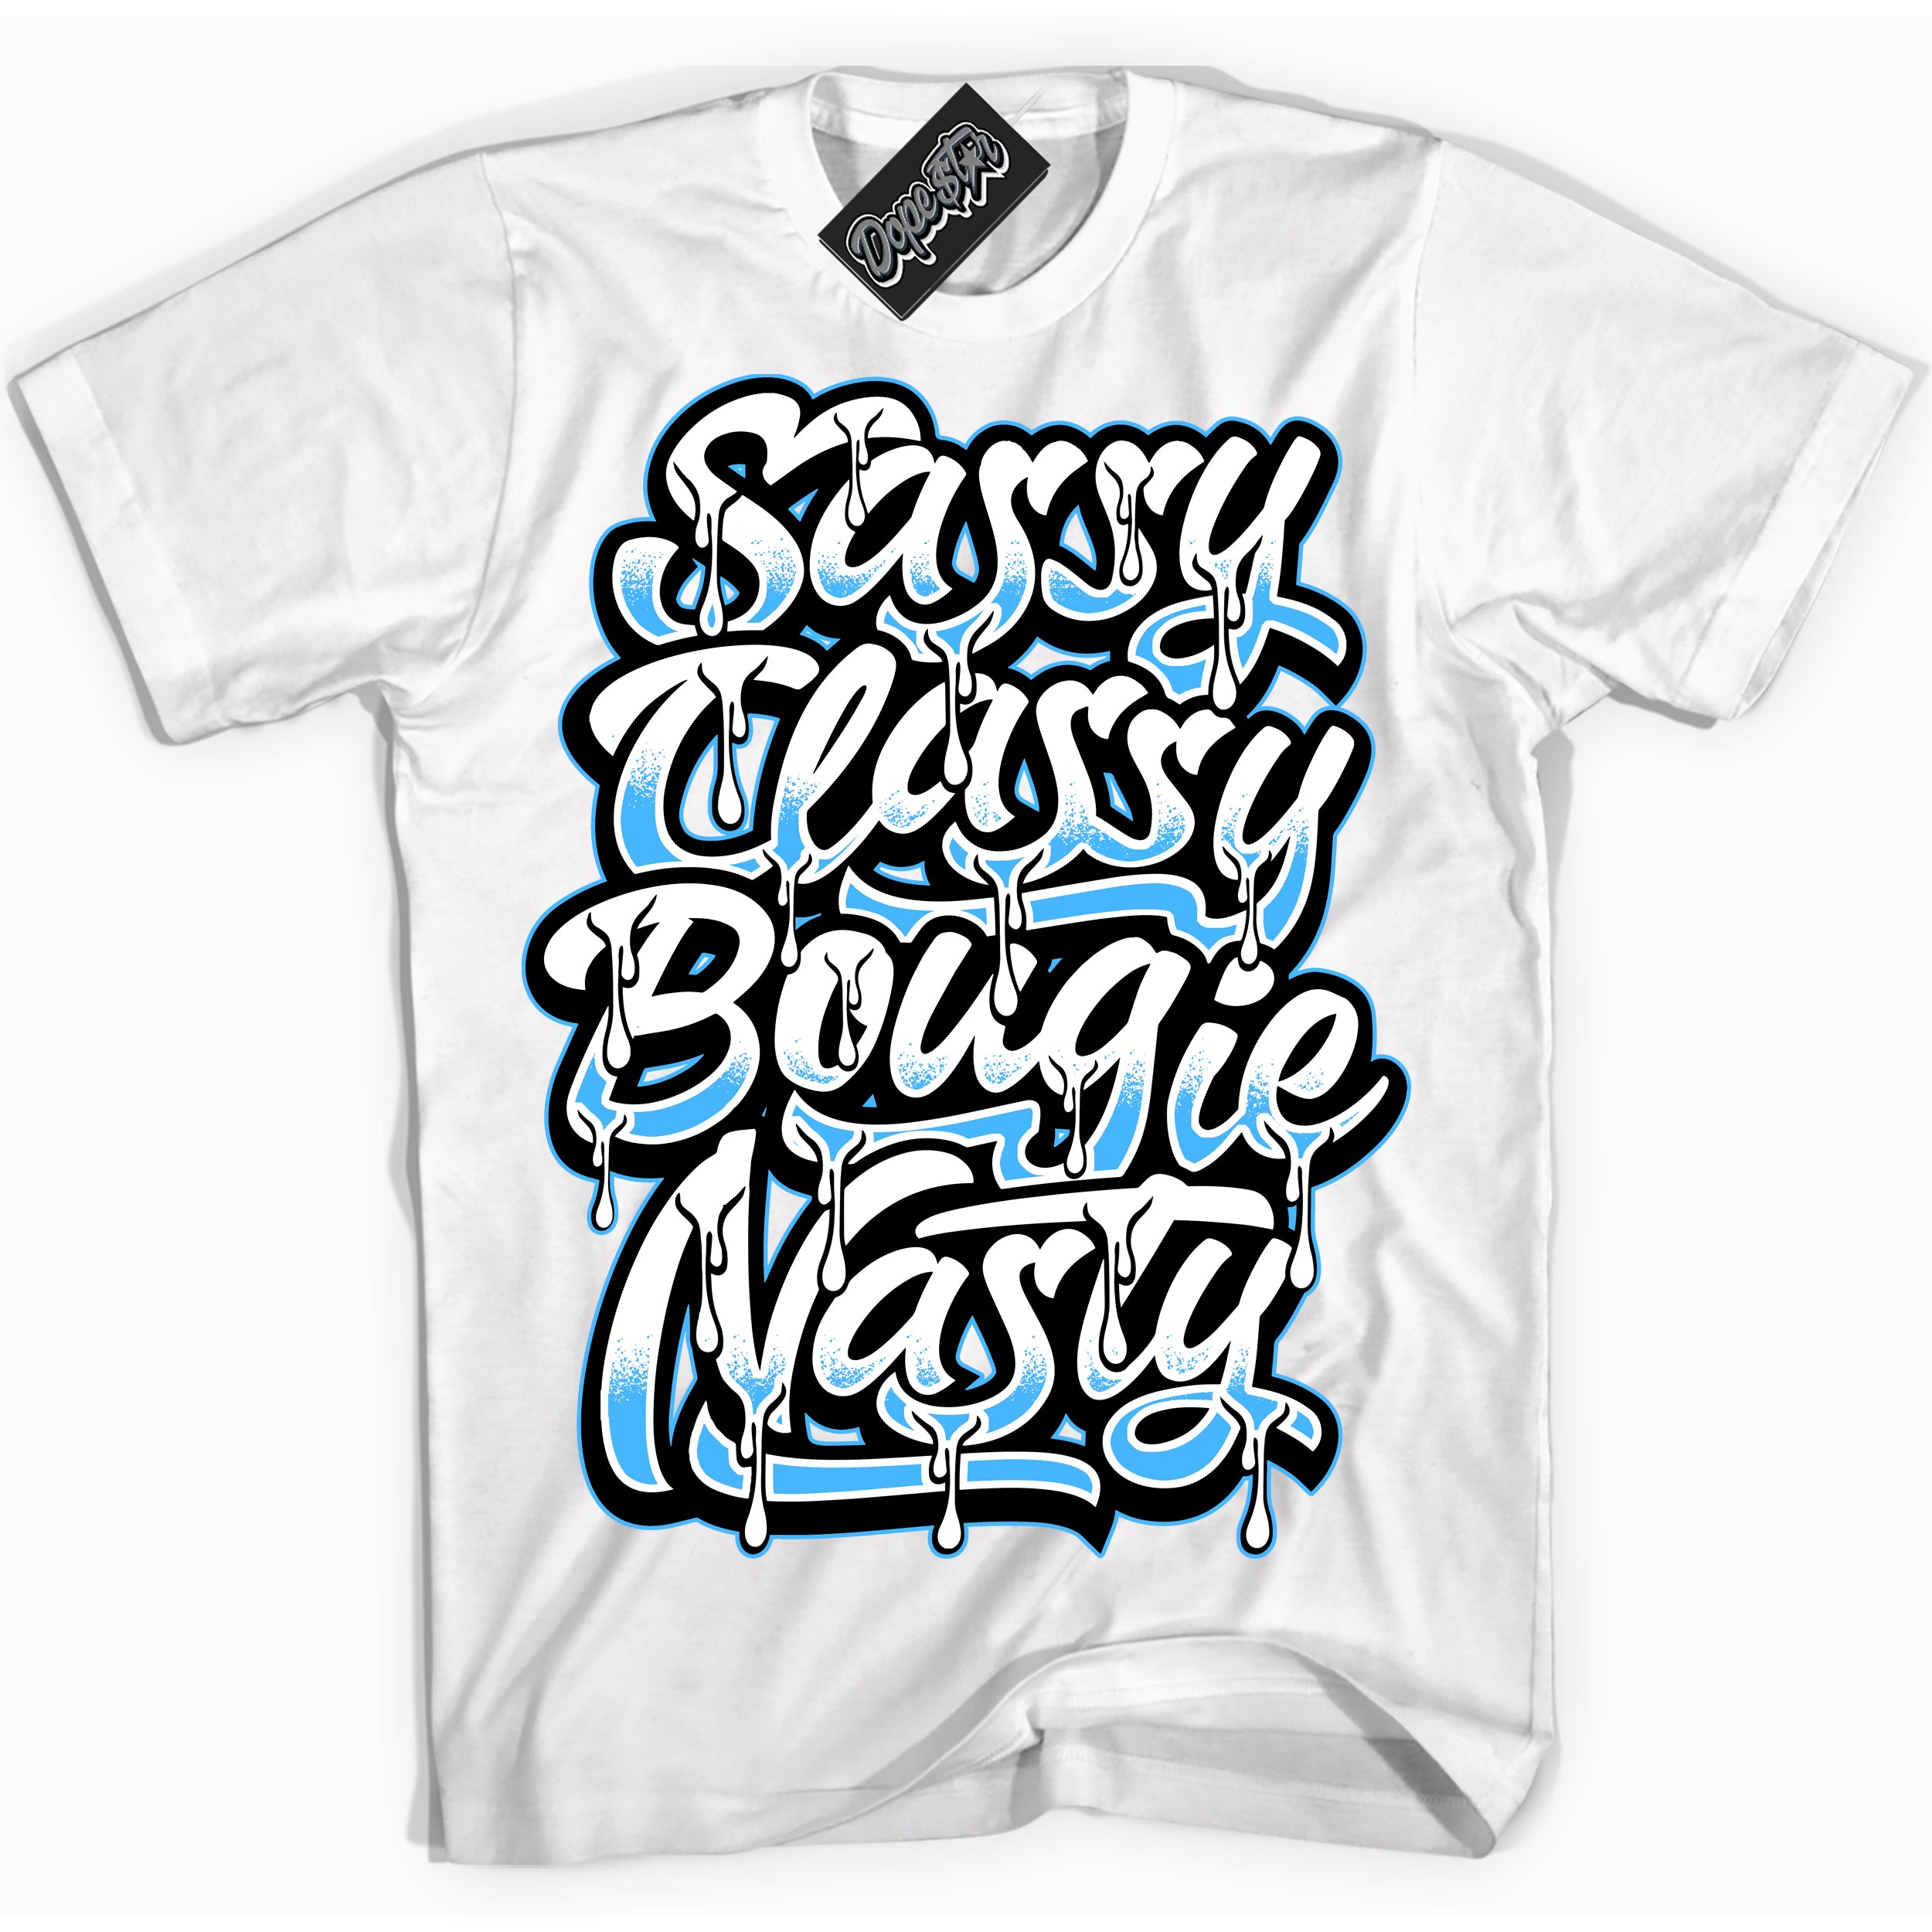 Cool White graphic tee with “ Sassy Classy ” design, that perfectly matches Powder Blue 9s sneakers 